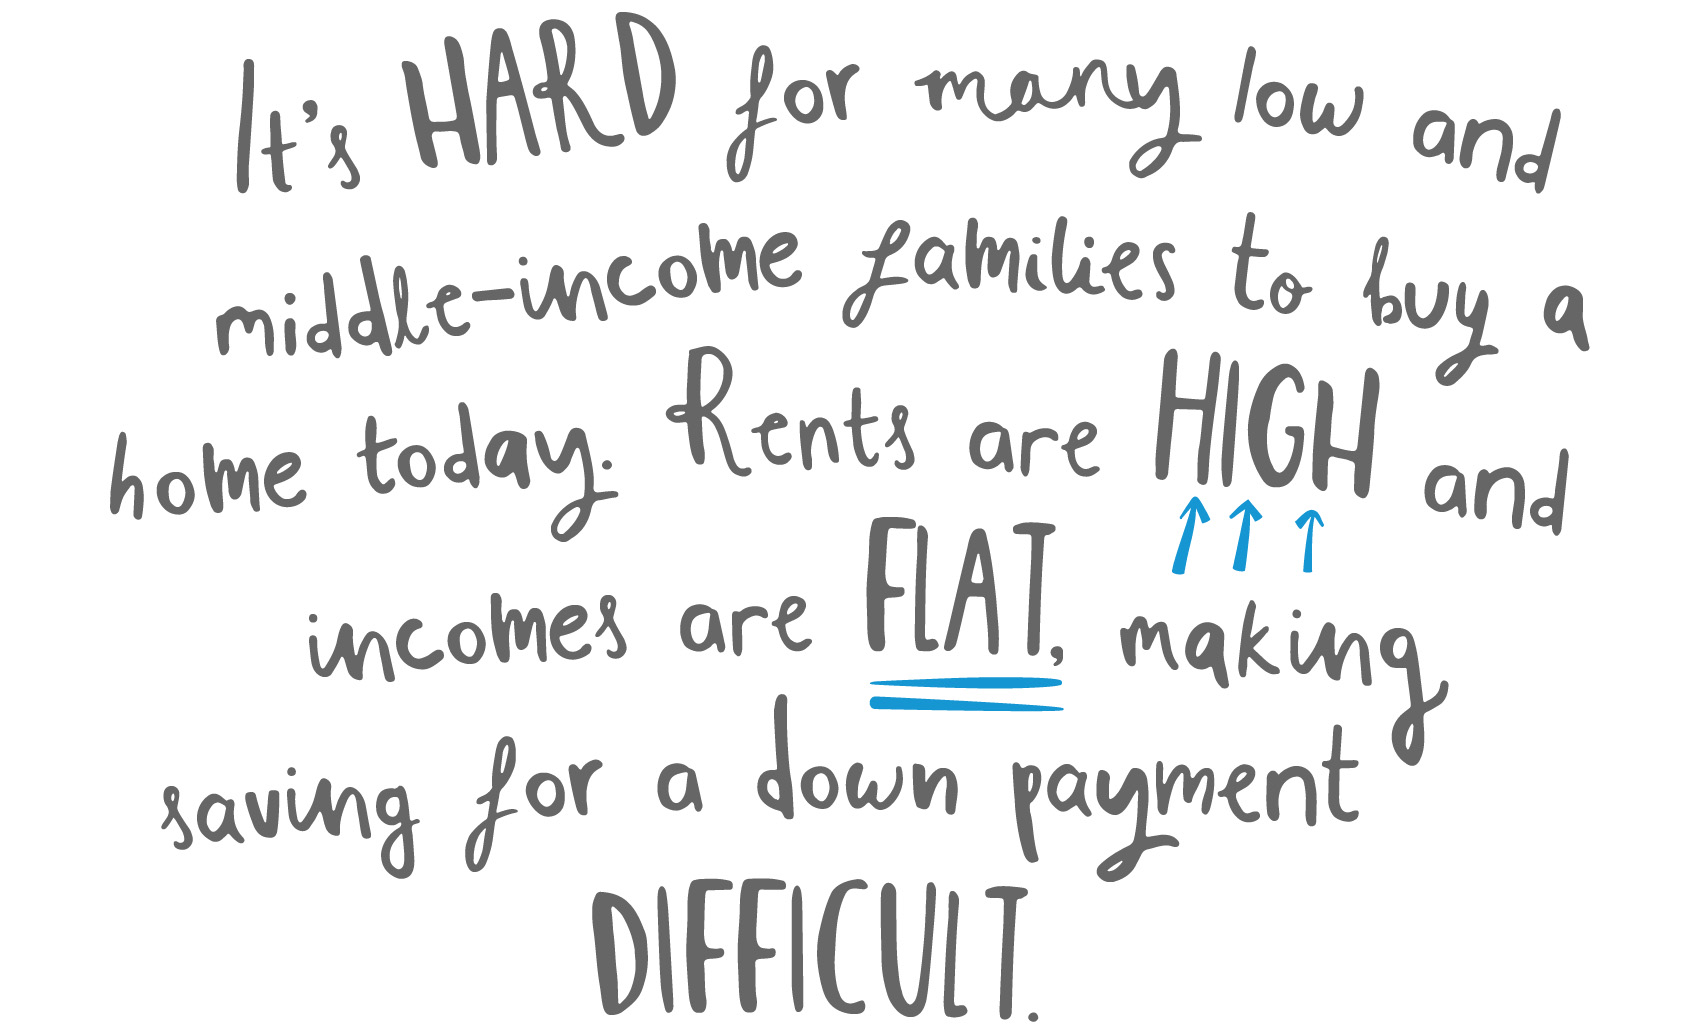 It's hard for many low and middle-income families to buy a home today. Rents are so High and incomes are Flat, making saving for a down payment Difficult.